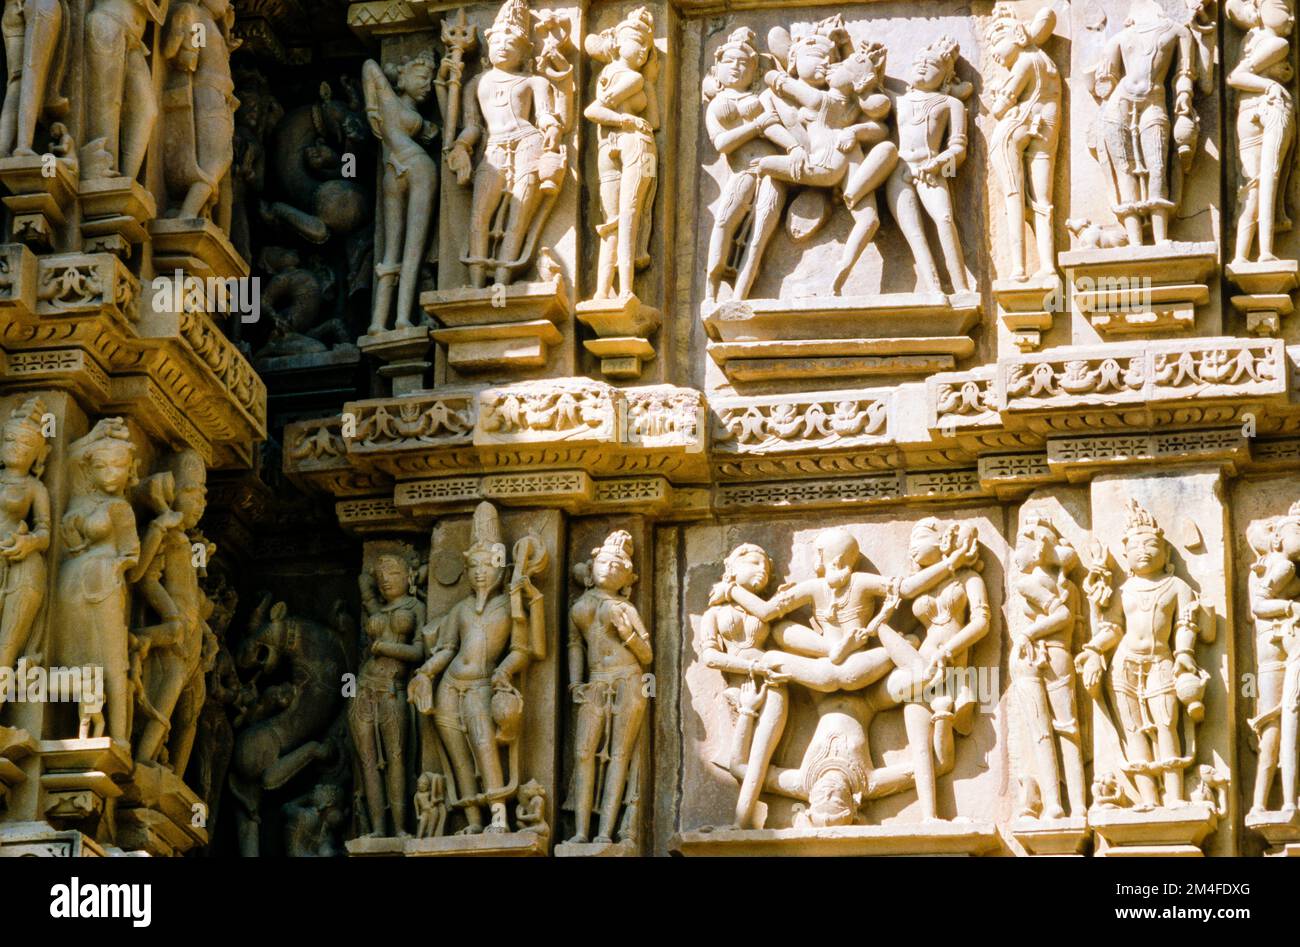 Amazing stonecarvings with scenes from Kamasutra make the Khajuraho-temples very special Stock Photo